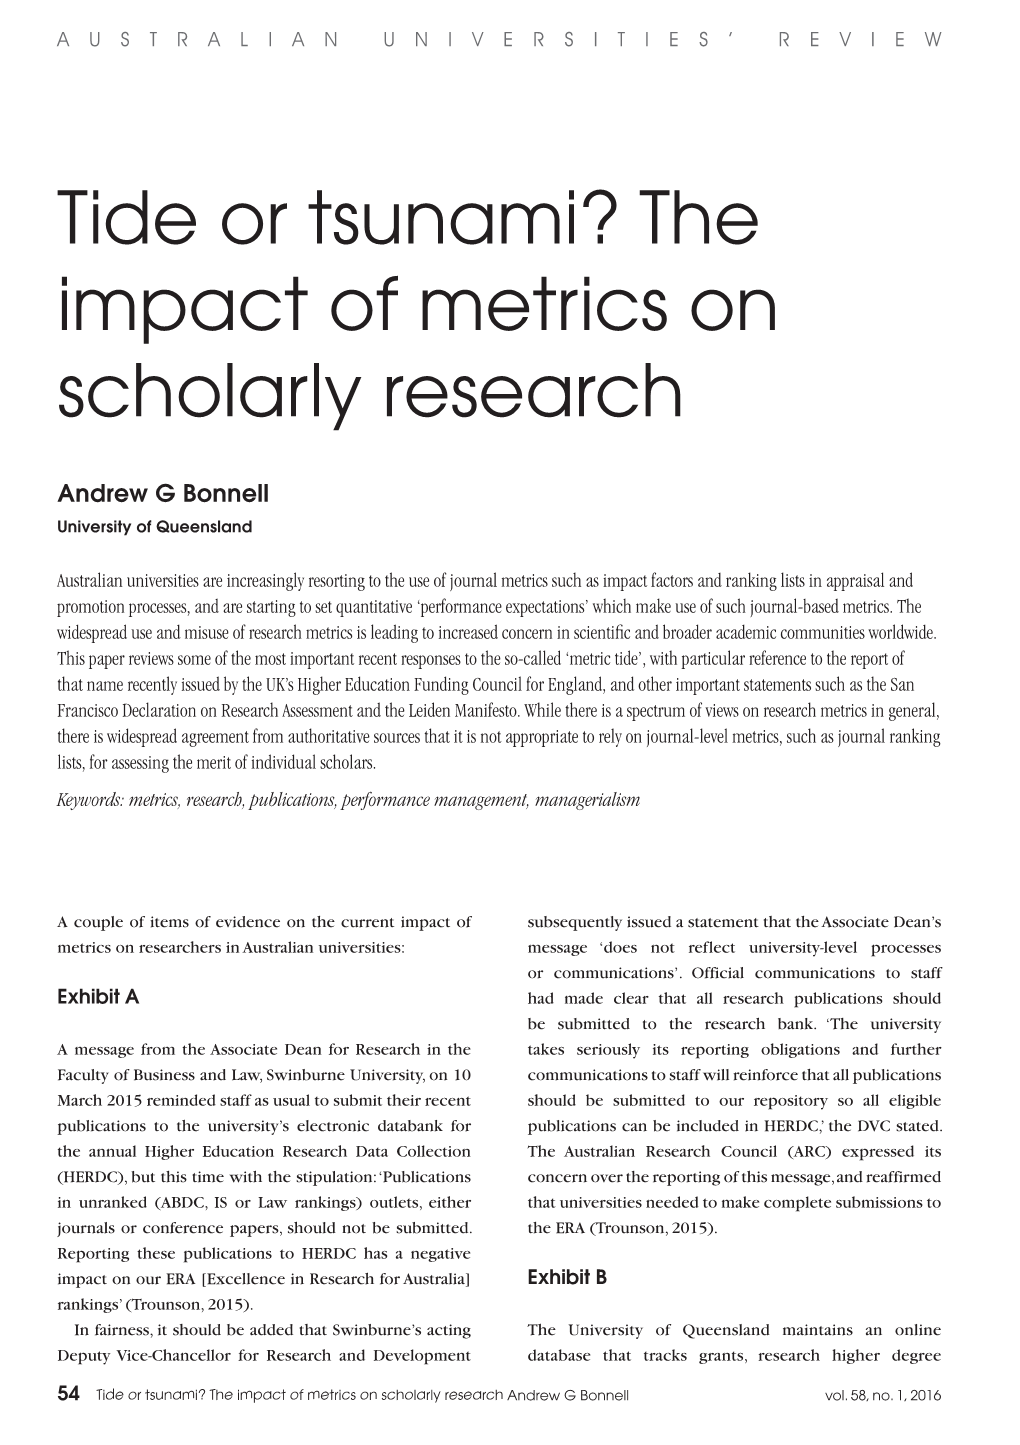 Tide Or Tsunami? the Impact of Metrics on Scholarly Research